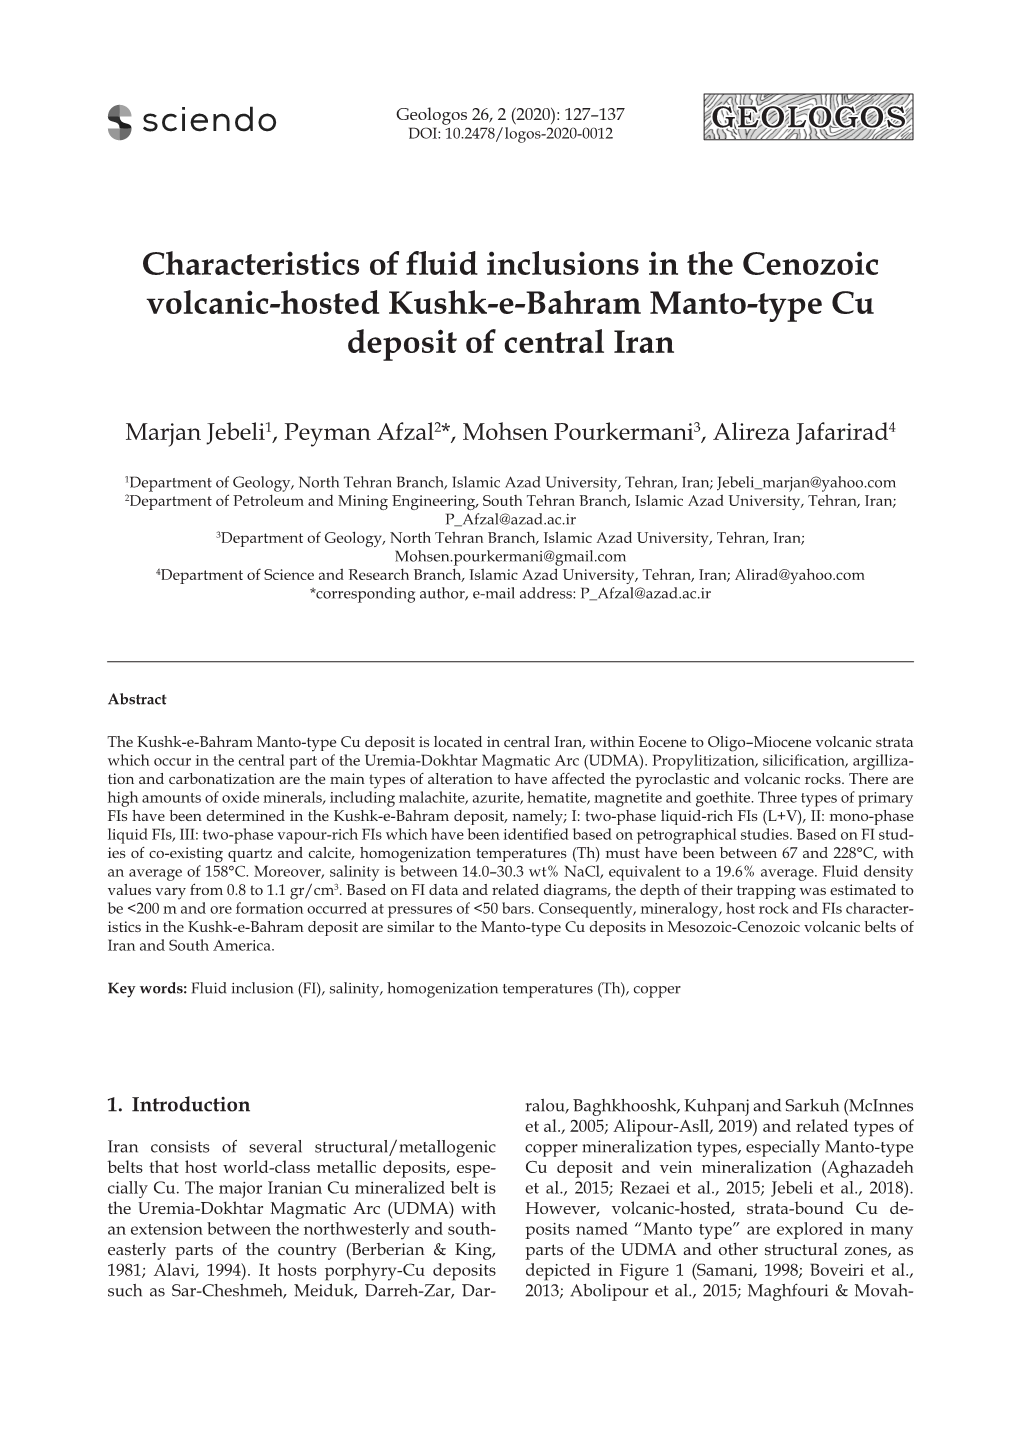 Characteristics of Fluid Inclusions in the Cenozoic Volcanic-Hosted Kushk-E-Bahram Manto-Type Cu Deposit of Central Iran